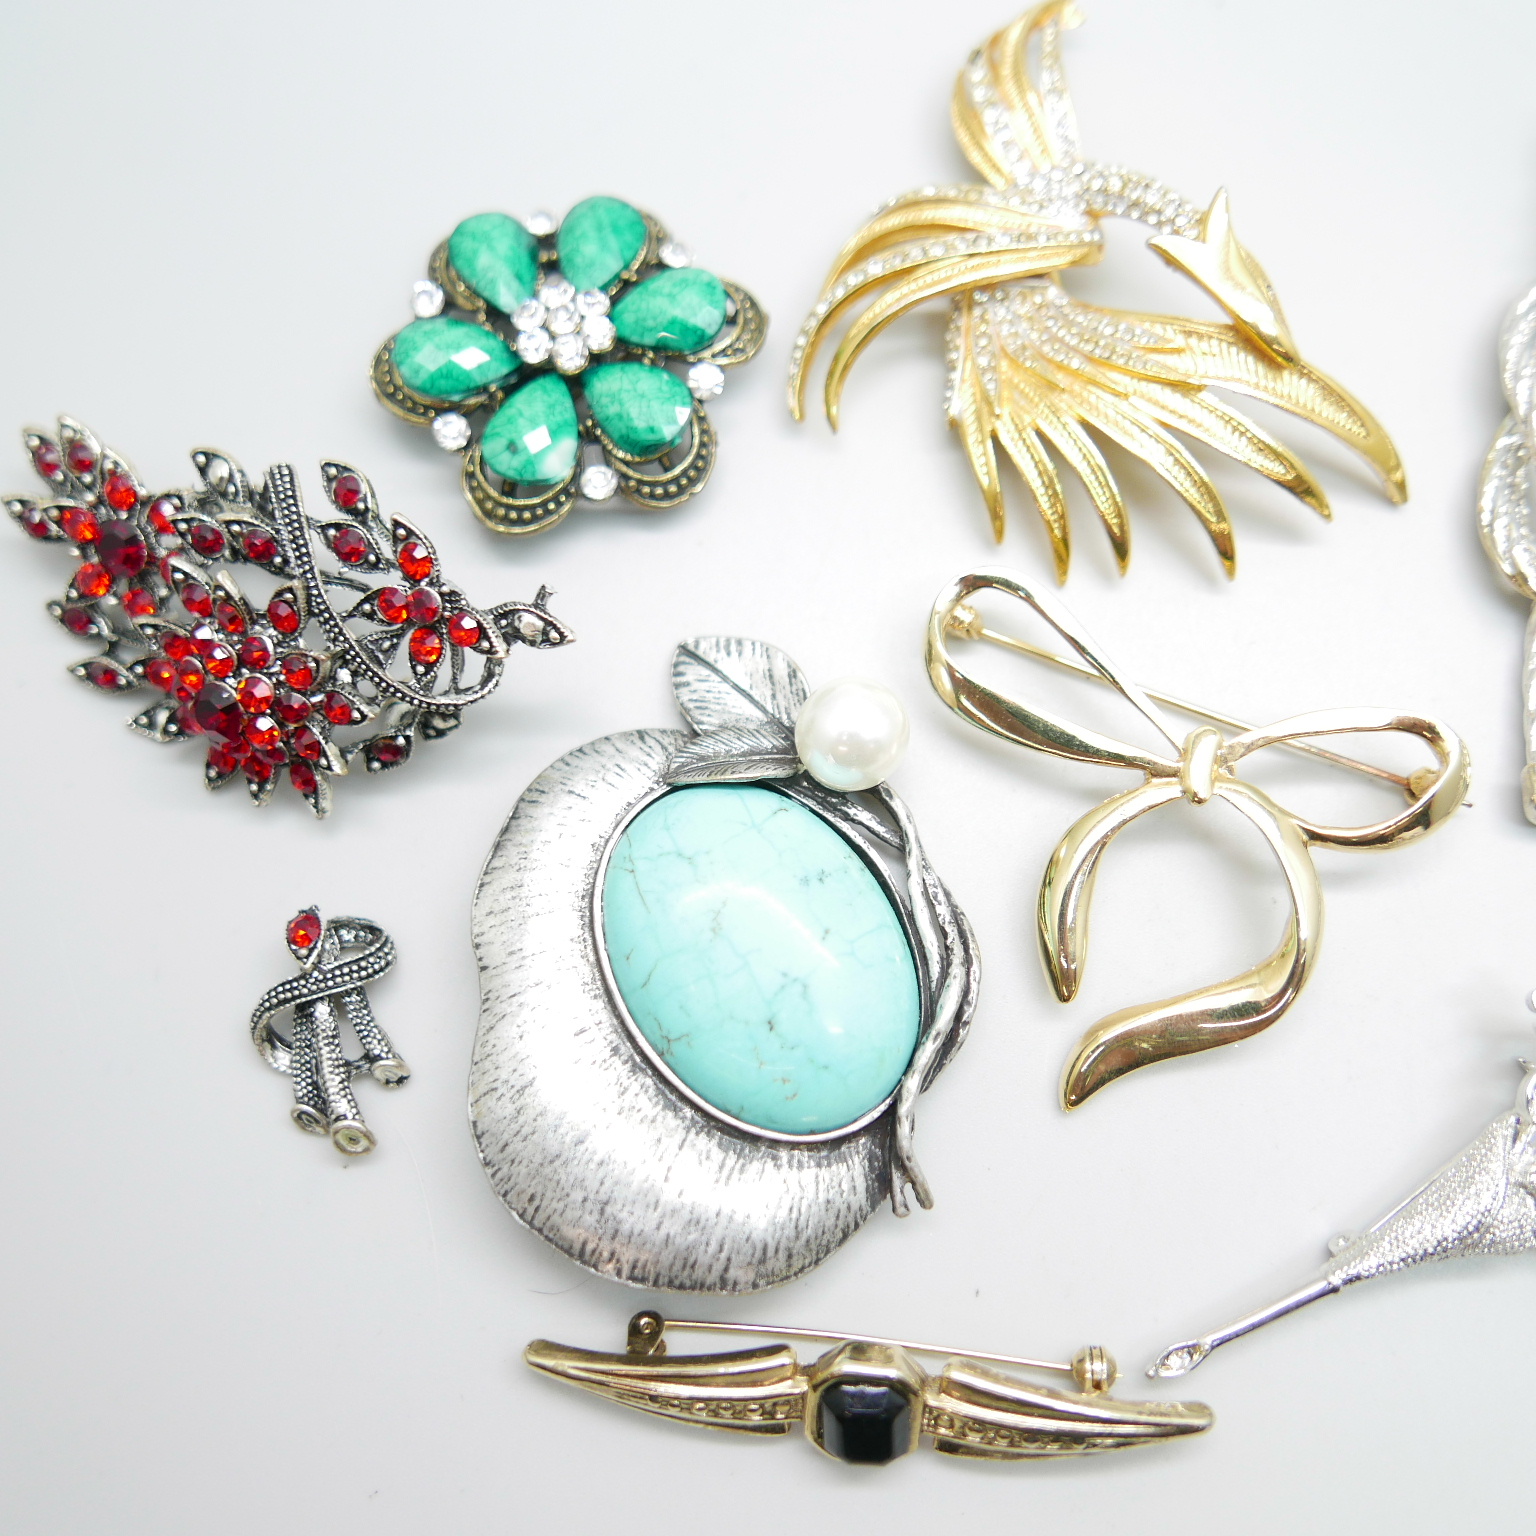 Ten vintage costume brooches - Image 2 of 3